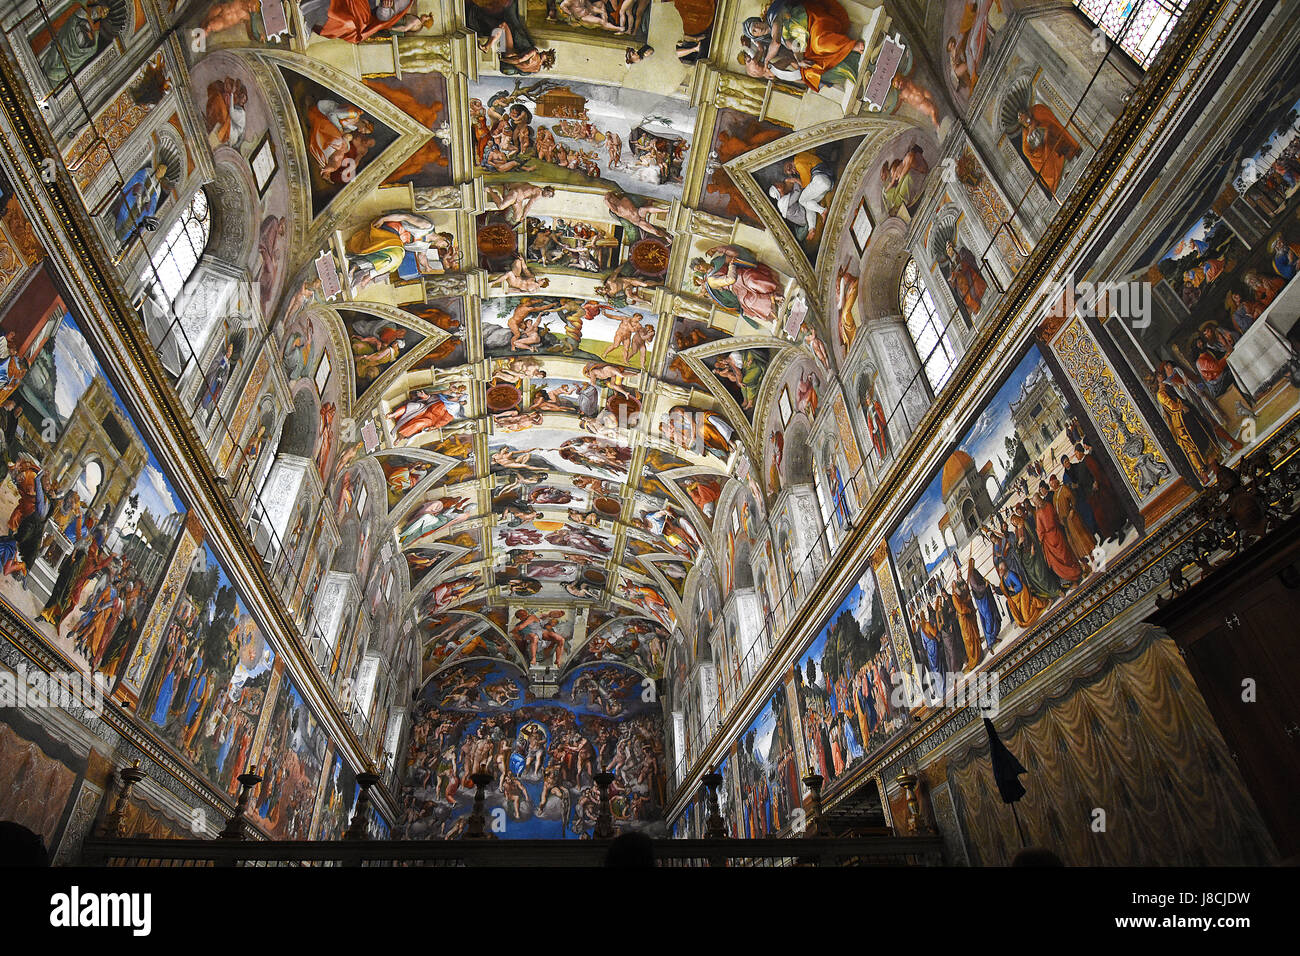 The beautiful paintings of the Sistine Chapel in the Vatican, Rome. Stock Photo